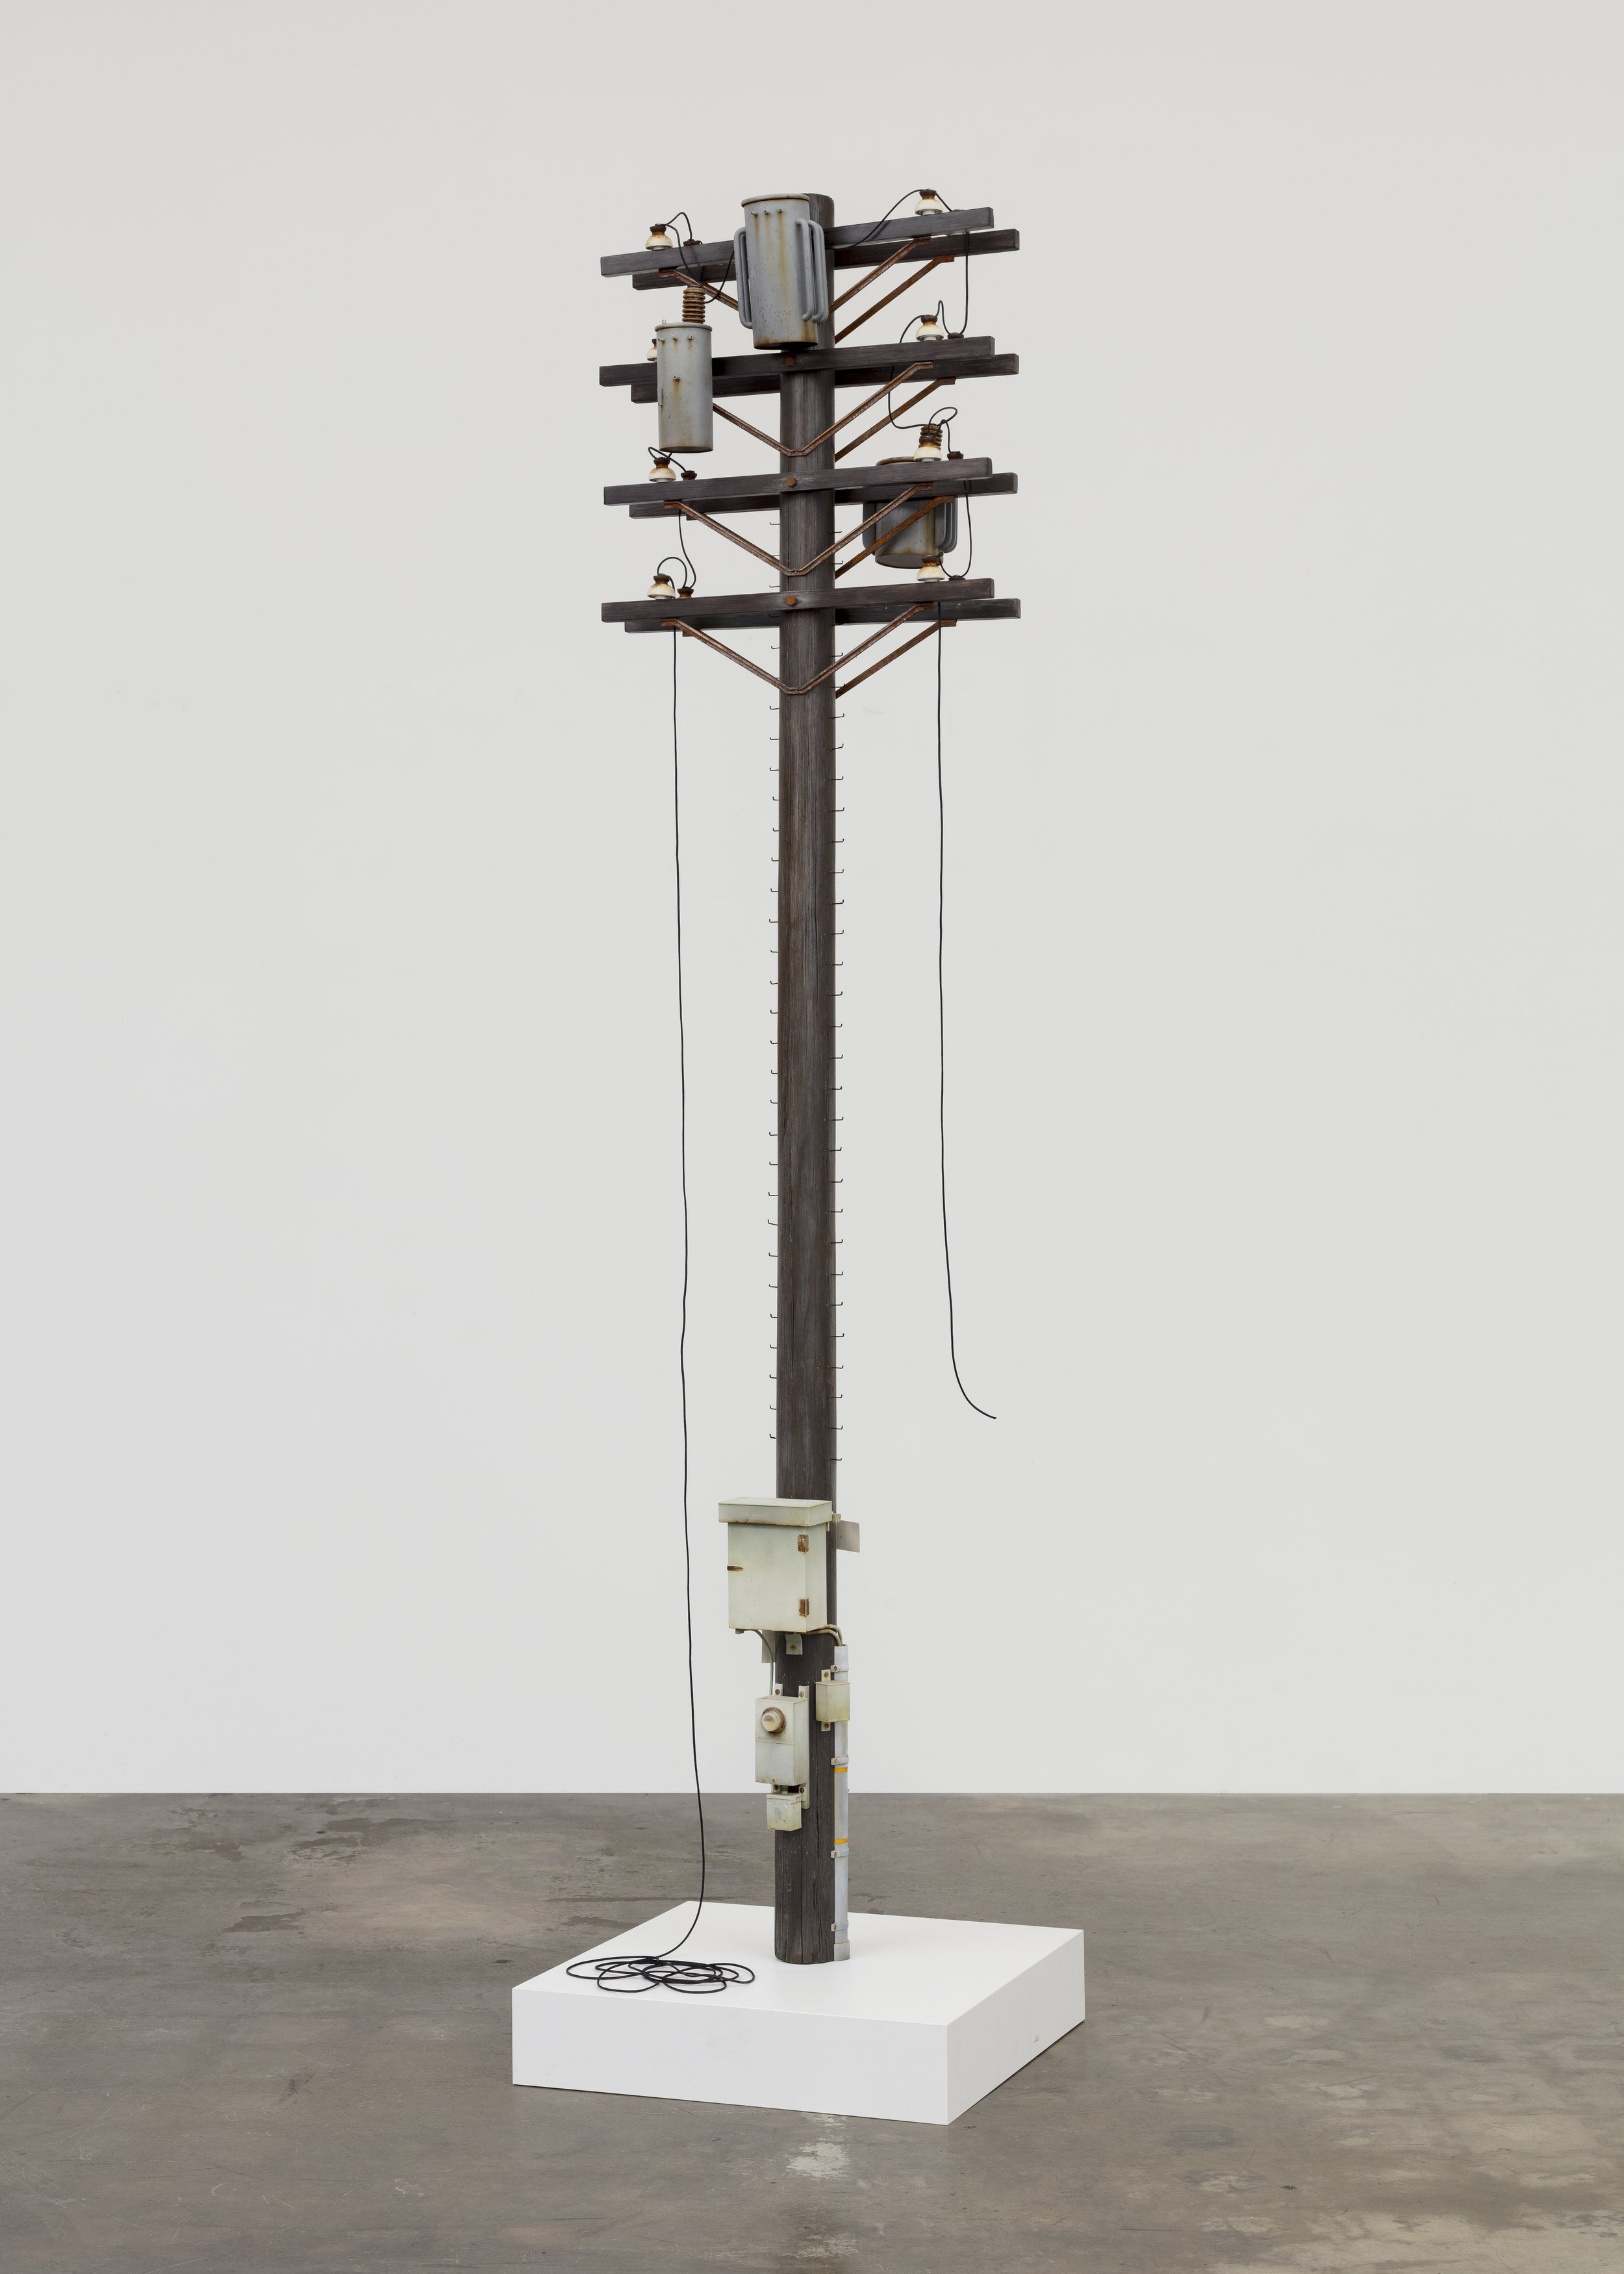   Totem 3 , 2023. Bondo, acrylic and solvent based paints on wood, paper, steel, nylon shoelace, PVC, and vinyl. 96 x 23 x 10 inches 